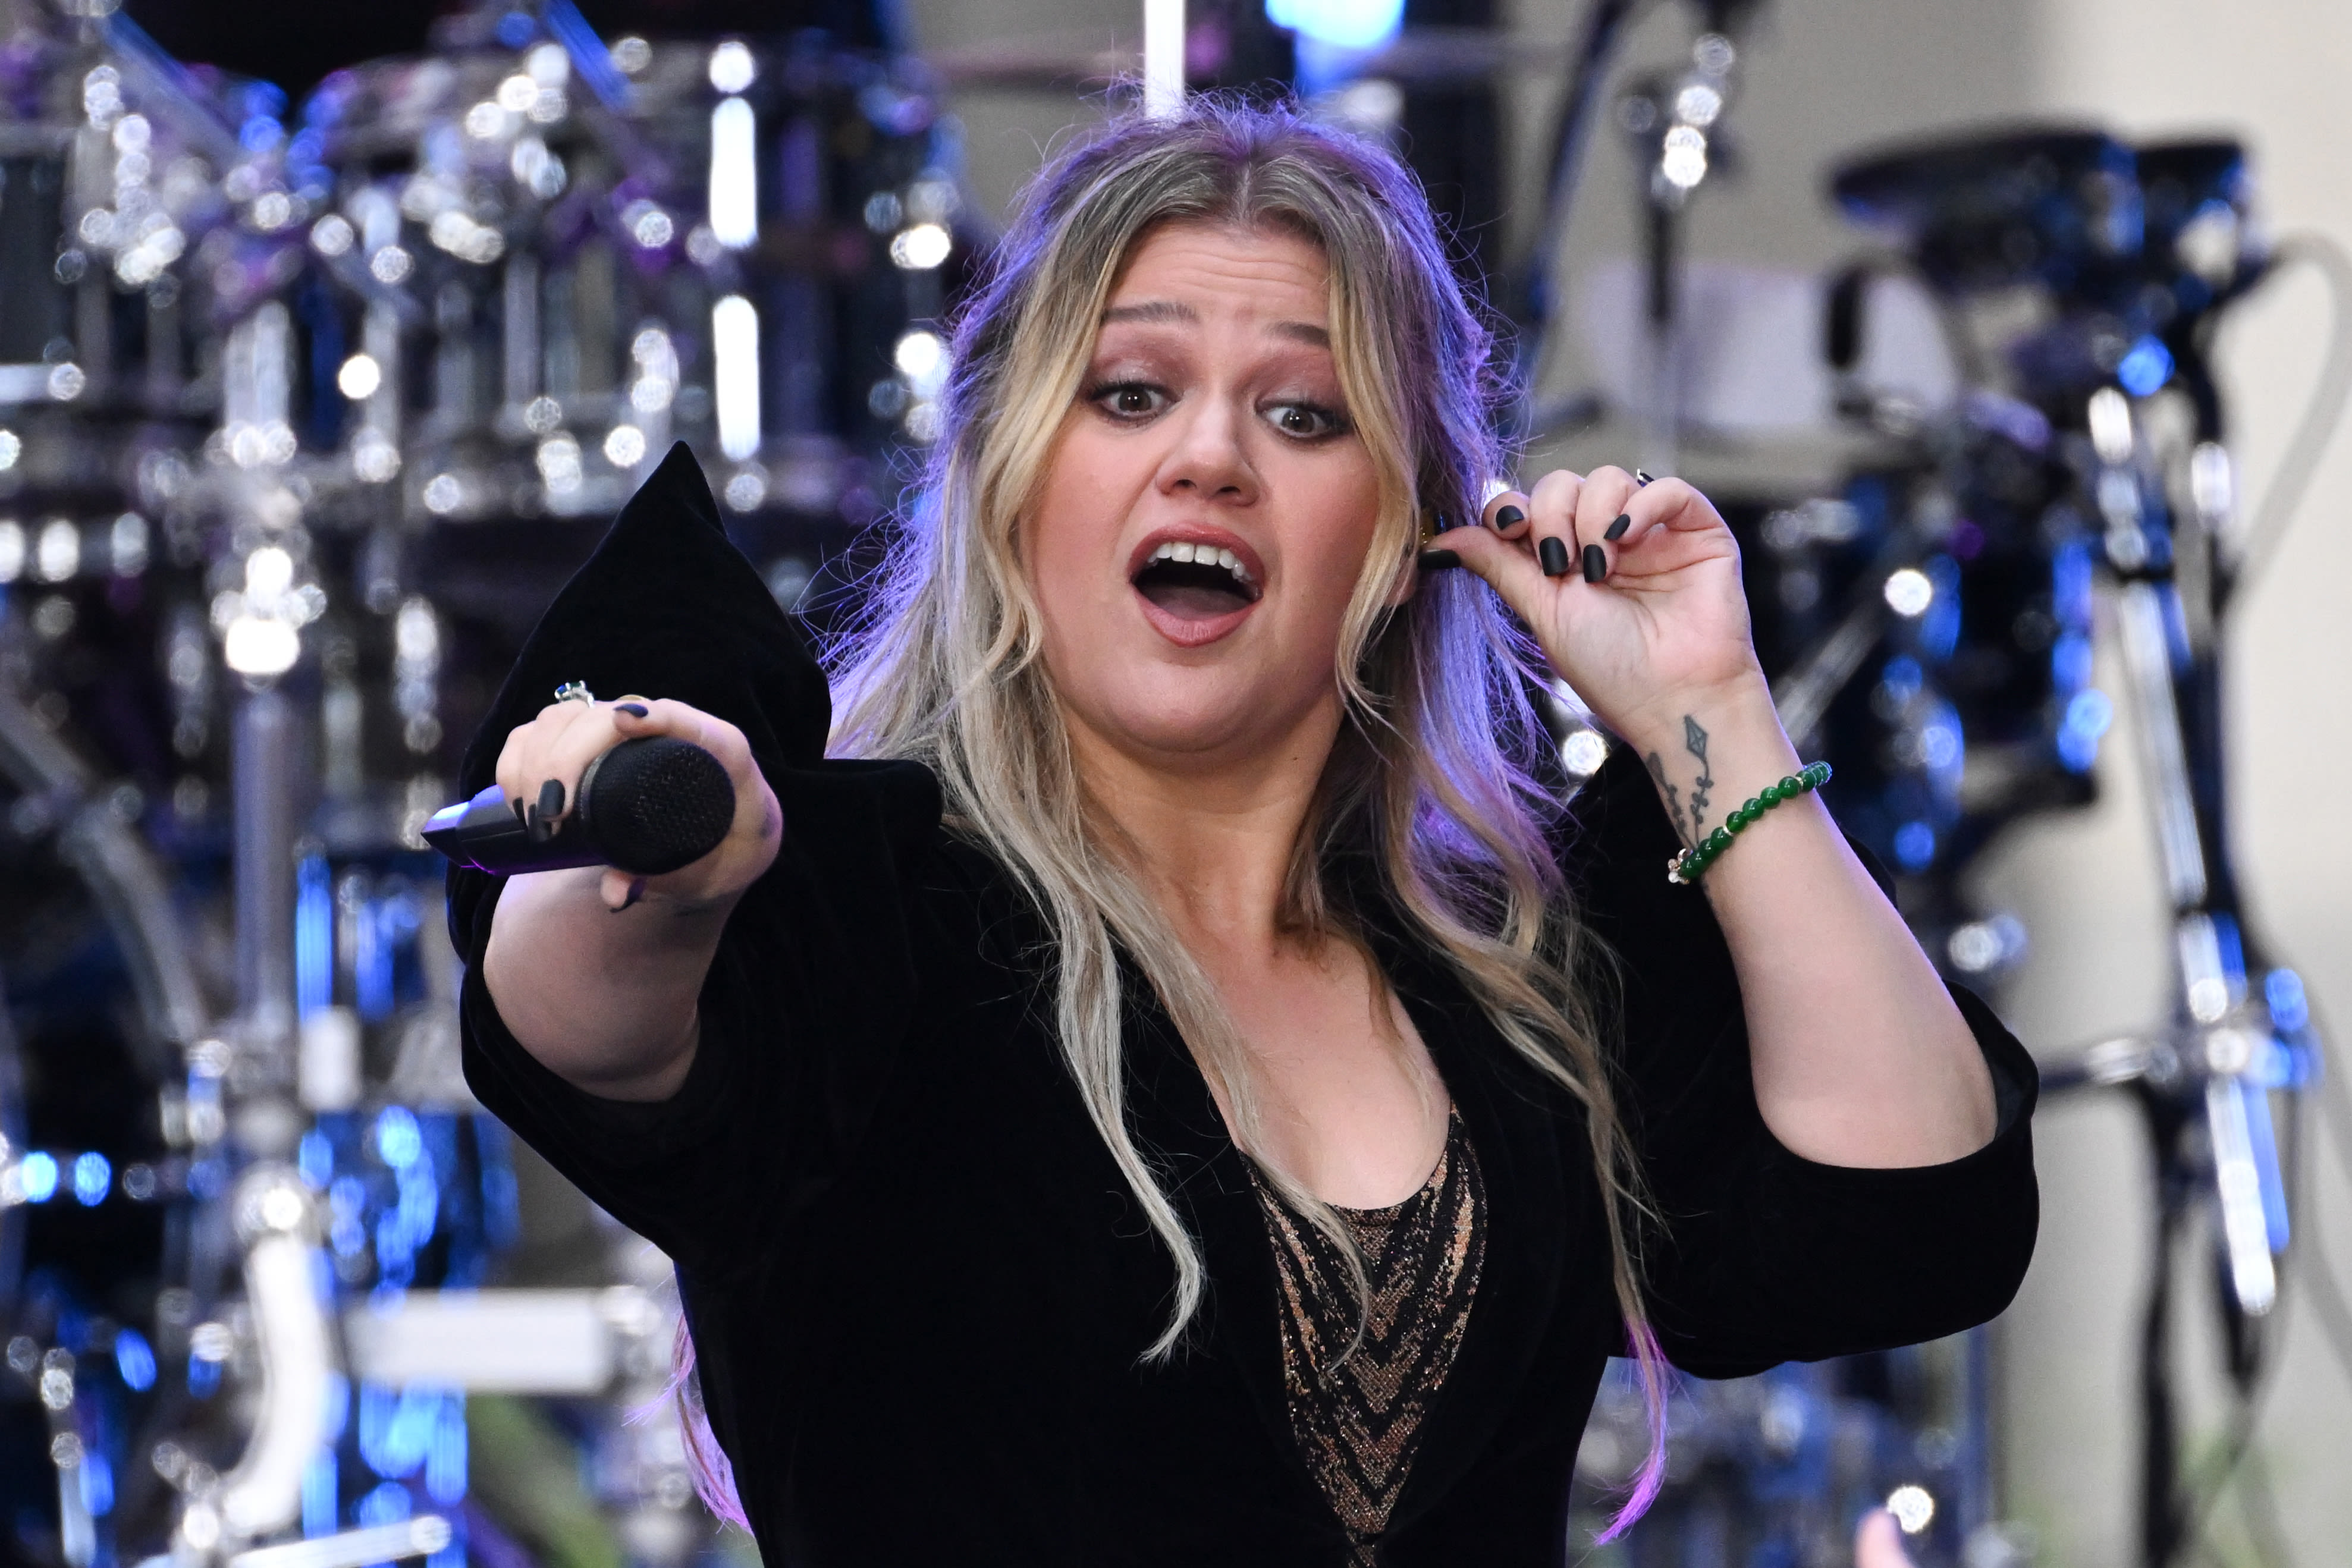 Watch how Kelly Clarkson expertly handles onstage mishap